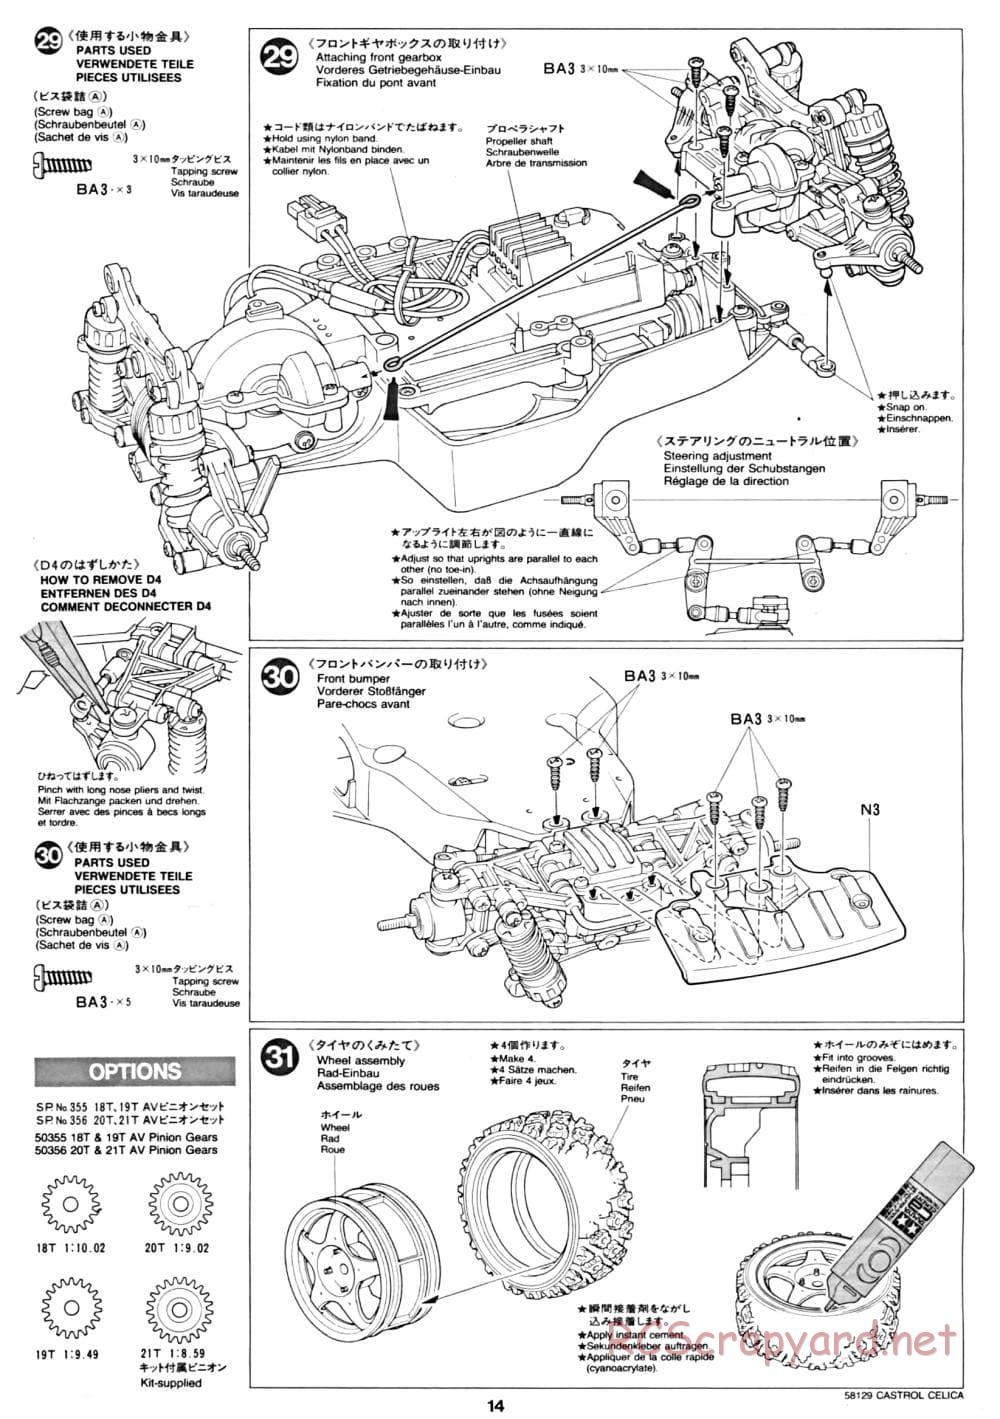 Tamiya - Castrol Celica 93 Monte-Carlo - TA-02 Chassis - Manual - Page 14